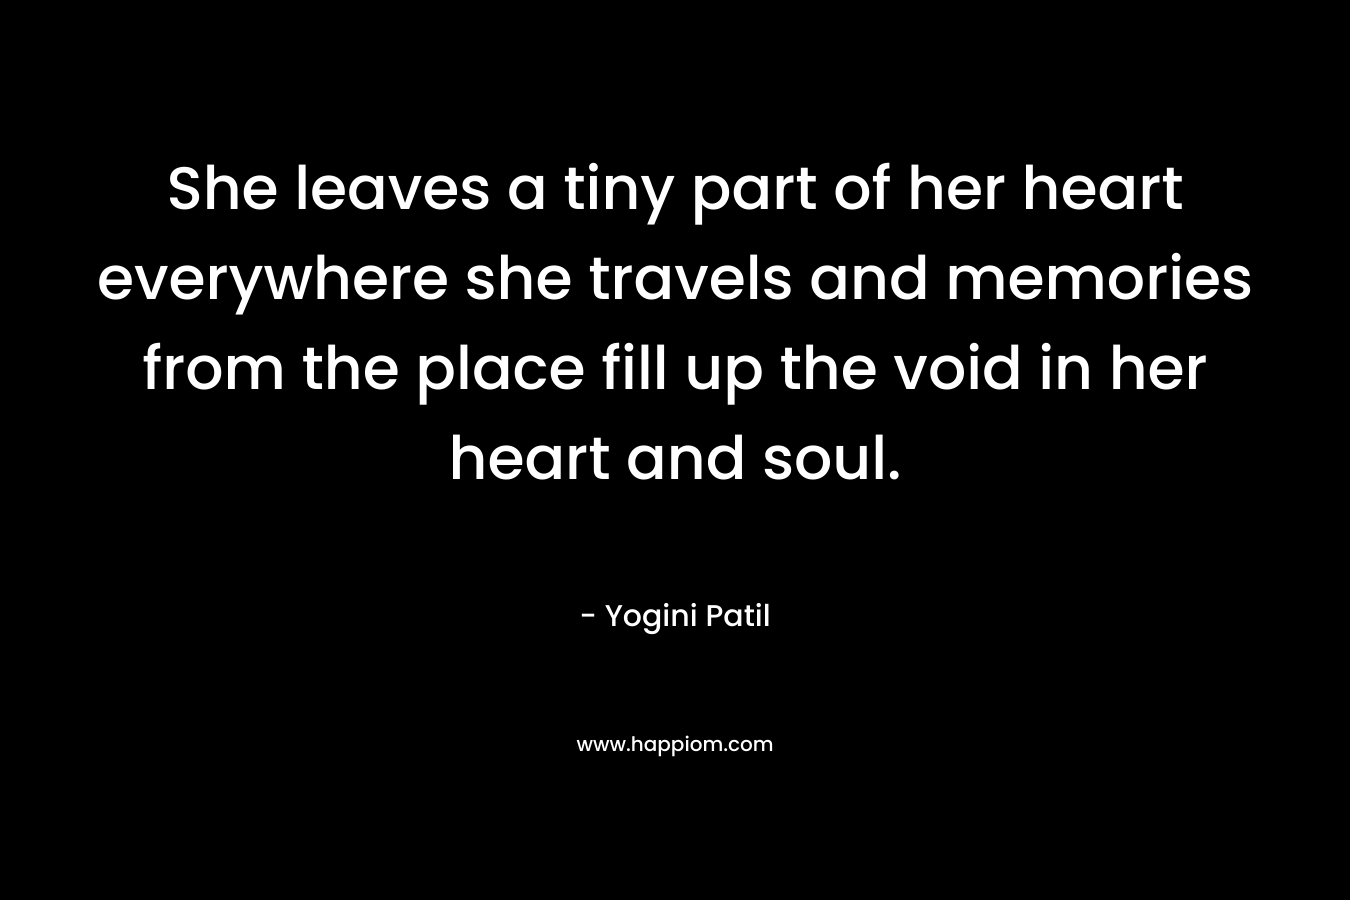 She leaves a tiny part of her heart everywhere she travels and memories from the place fill up the void in her heart and soul.